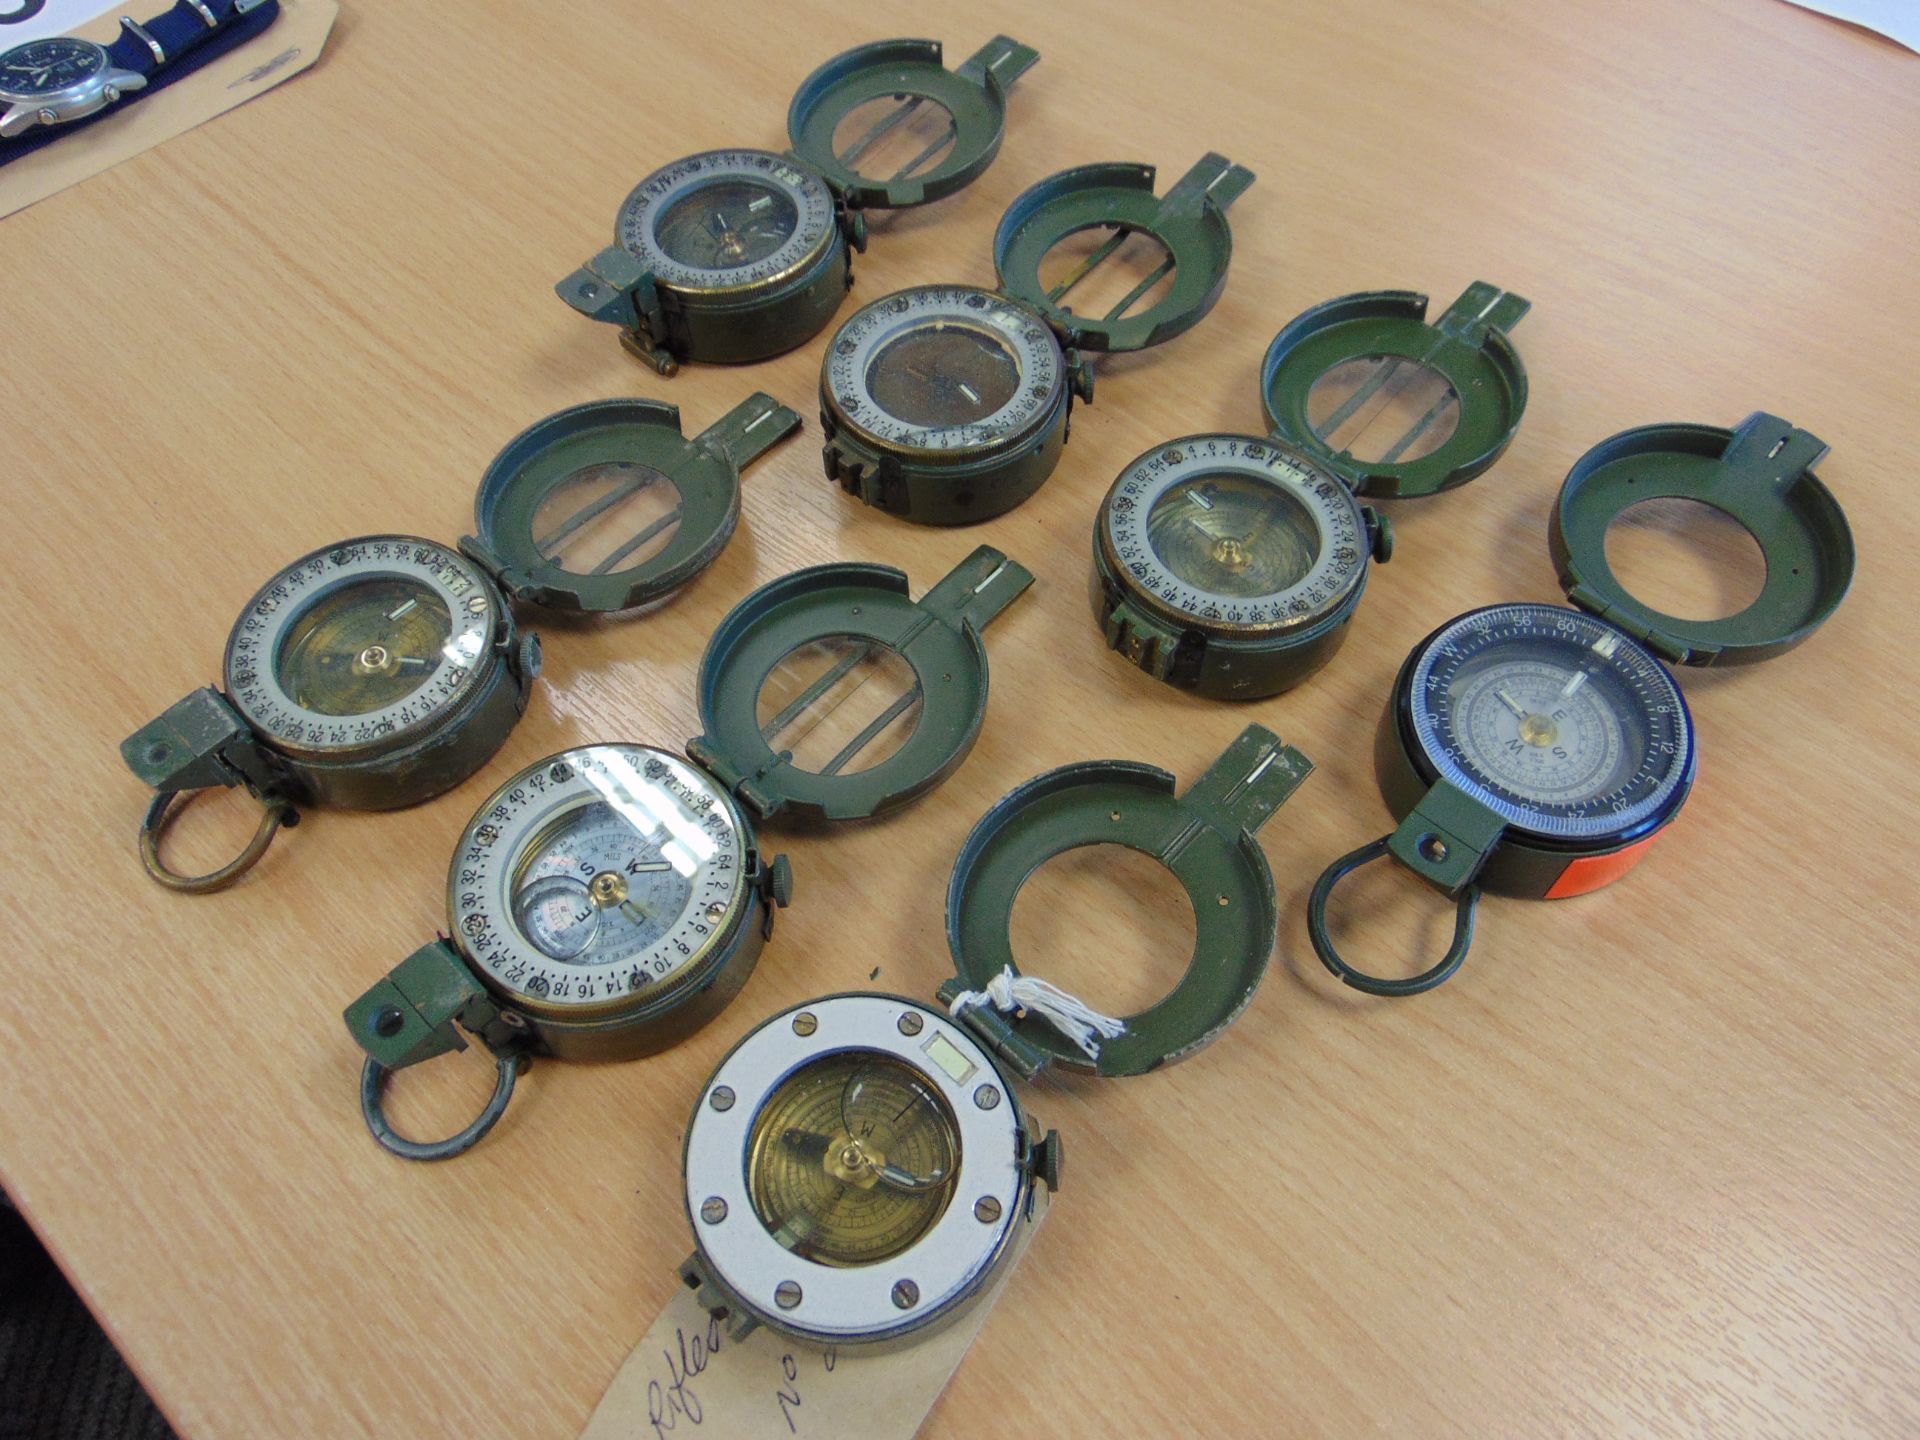 Oty x 7 British Army Prismatic Compass - Image 6 of 10